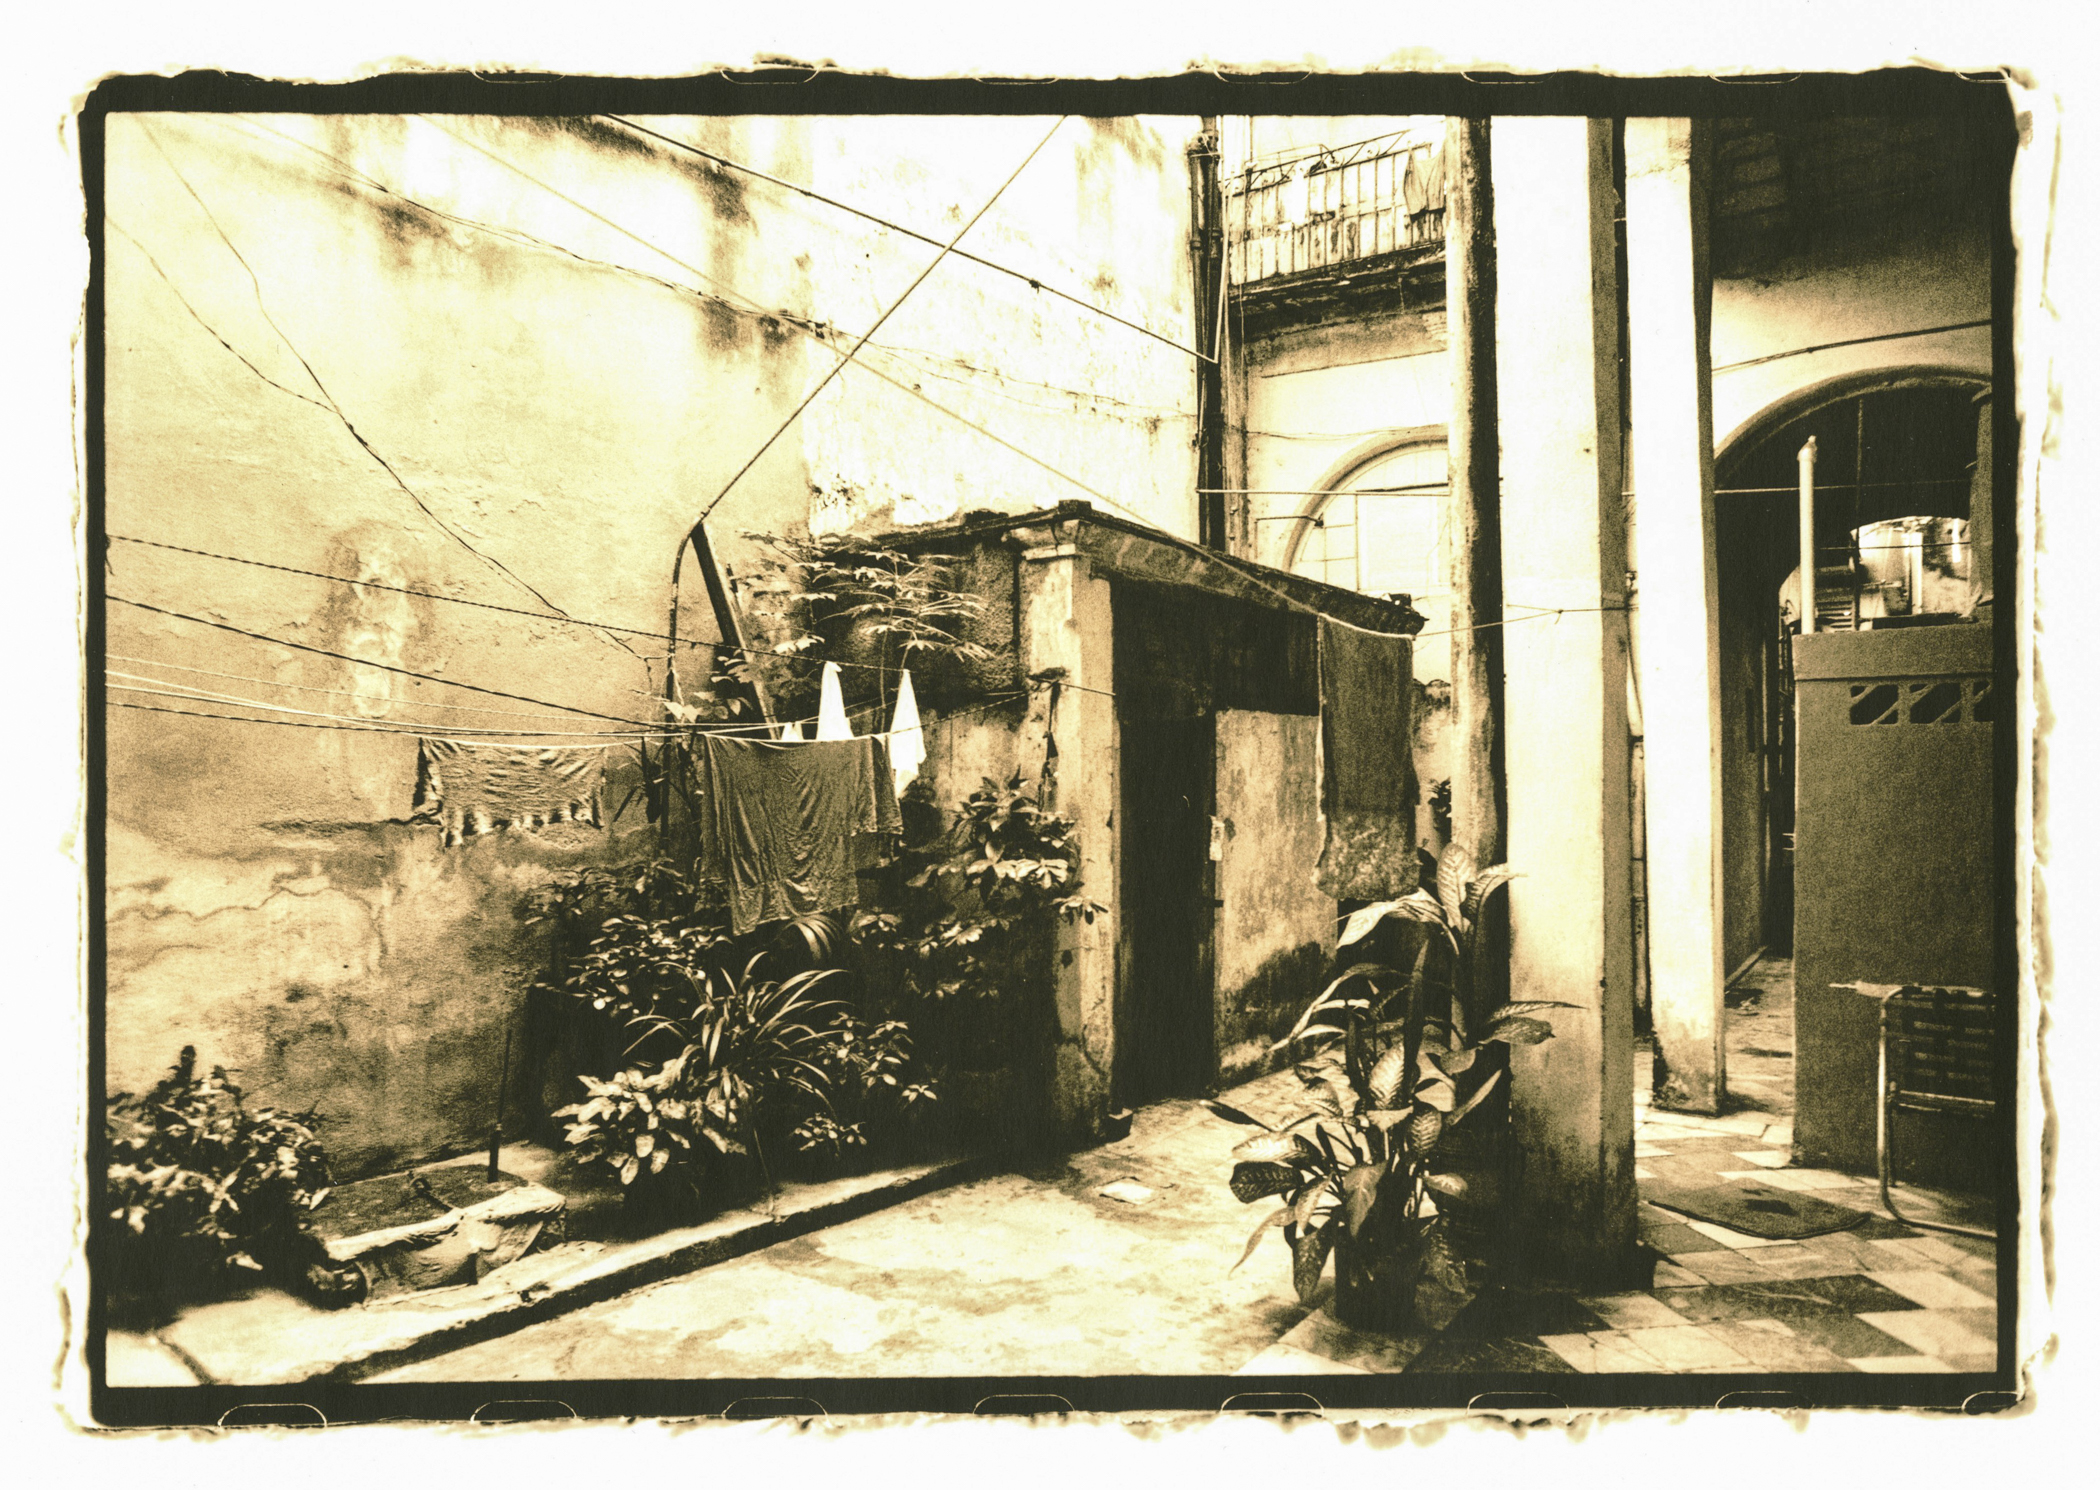 A sepia toned image of a courtyard in Havana